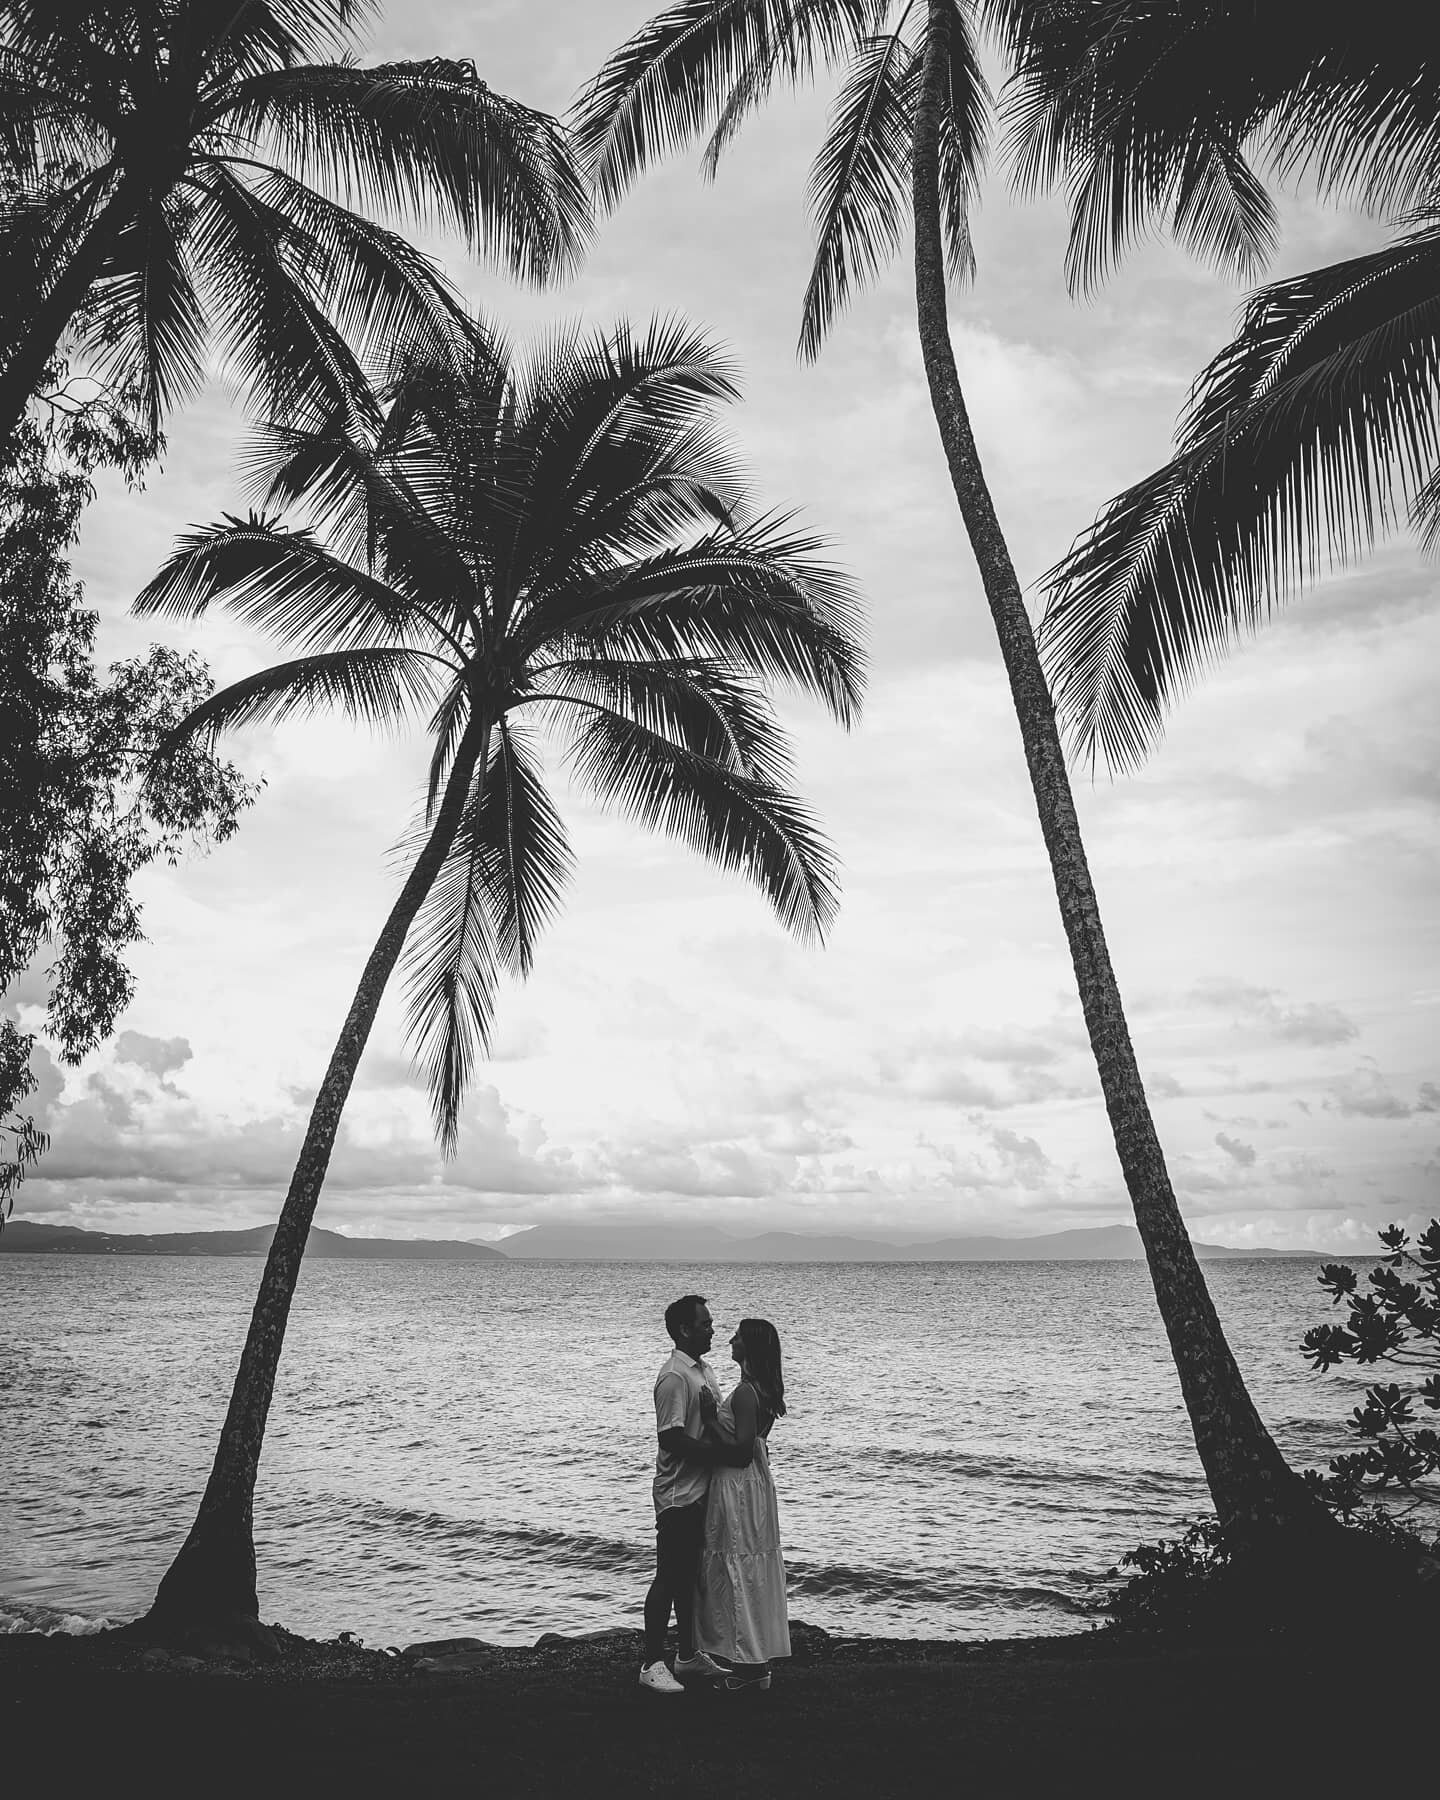 Little Cove in Port Douglas always looks amazing for weddings and photos!